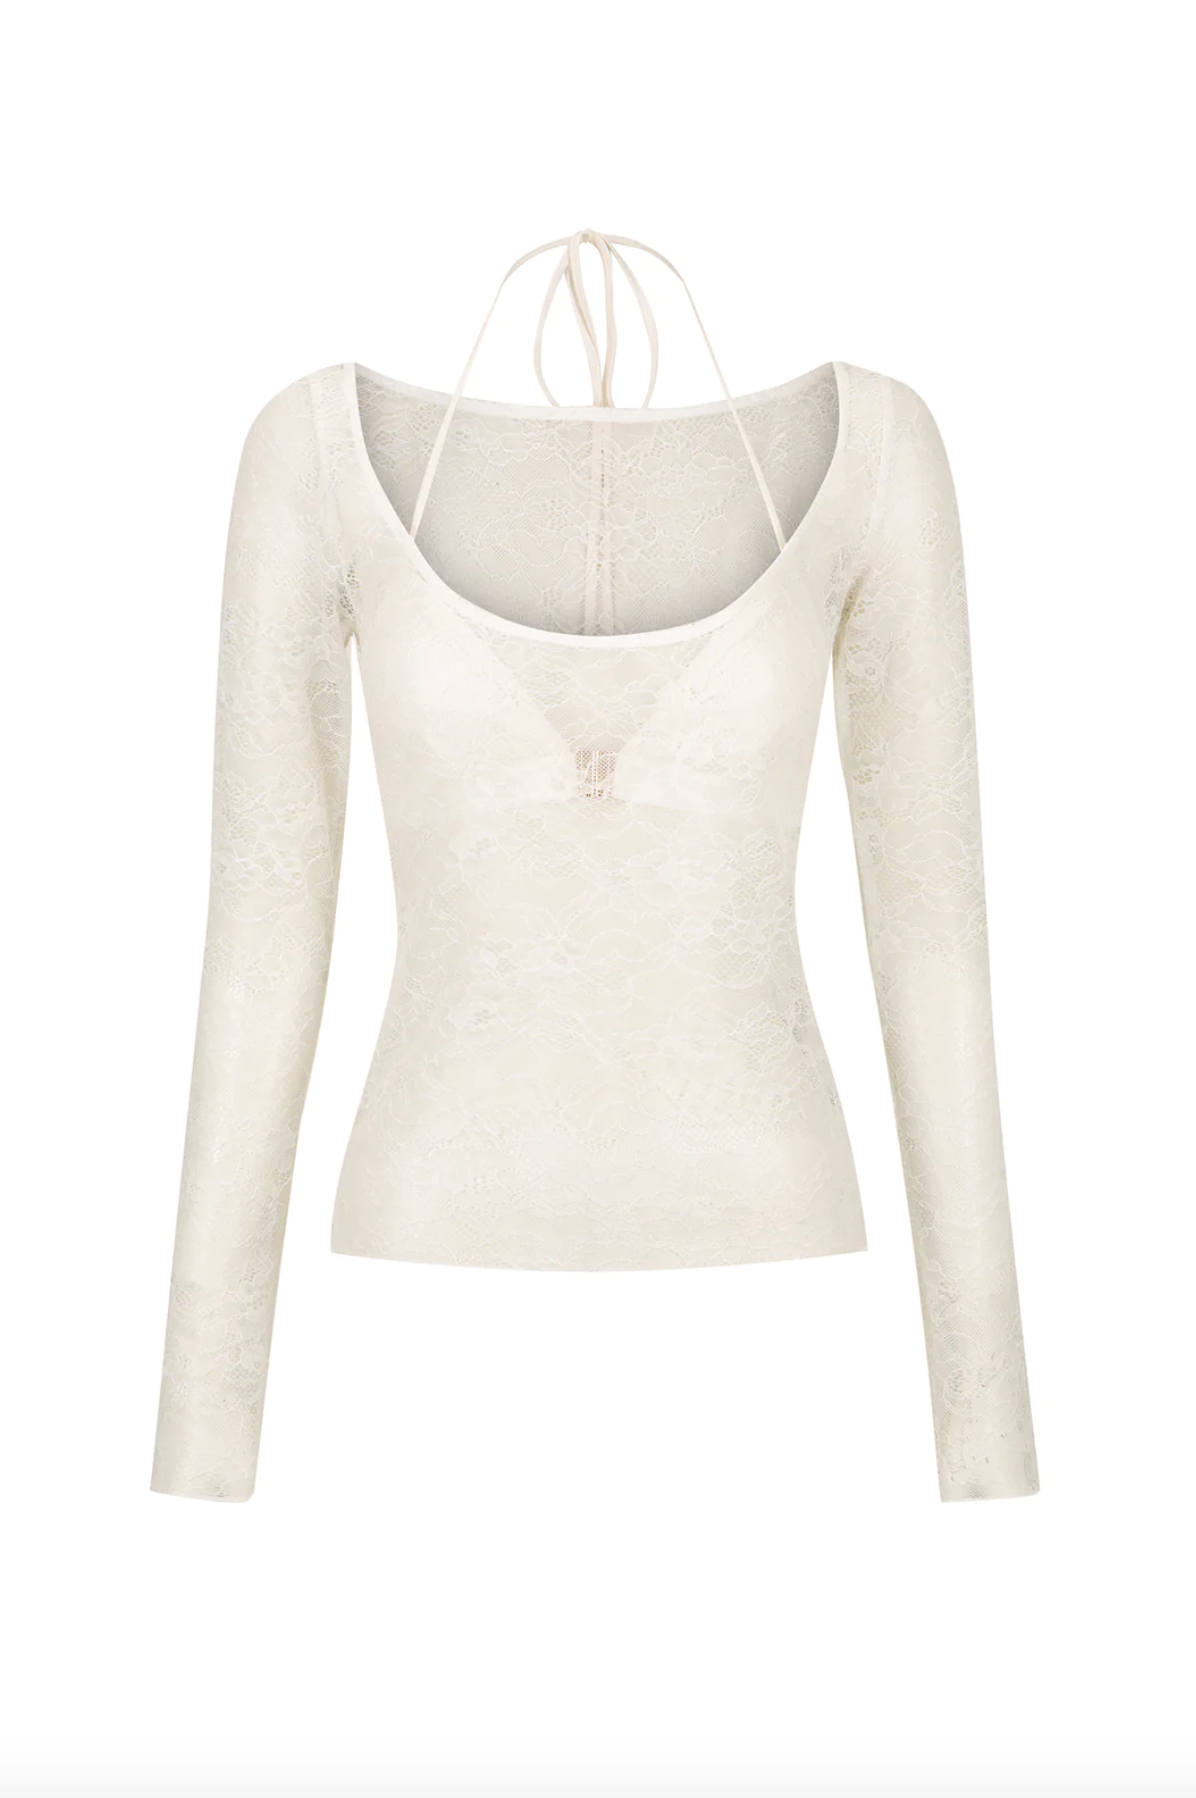 OMAR REVERSIBLE LACE TOP - IVORY